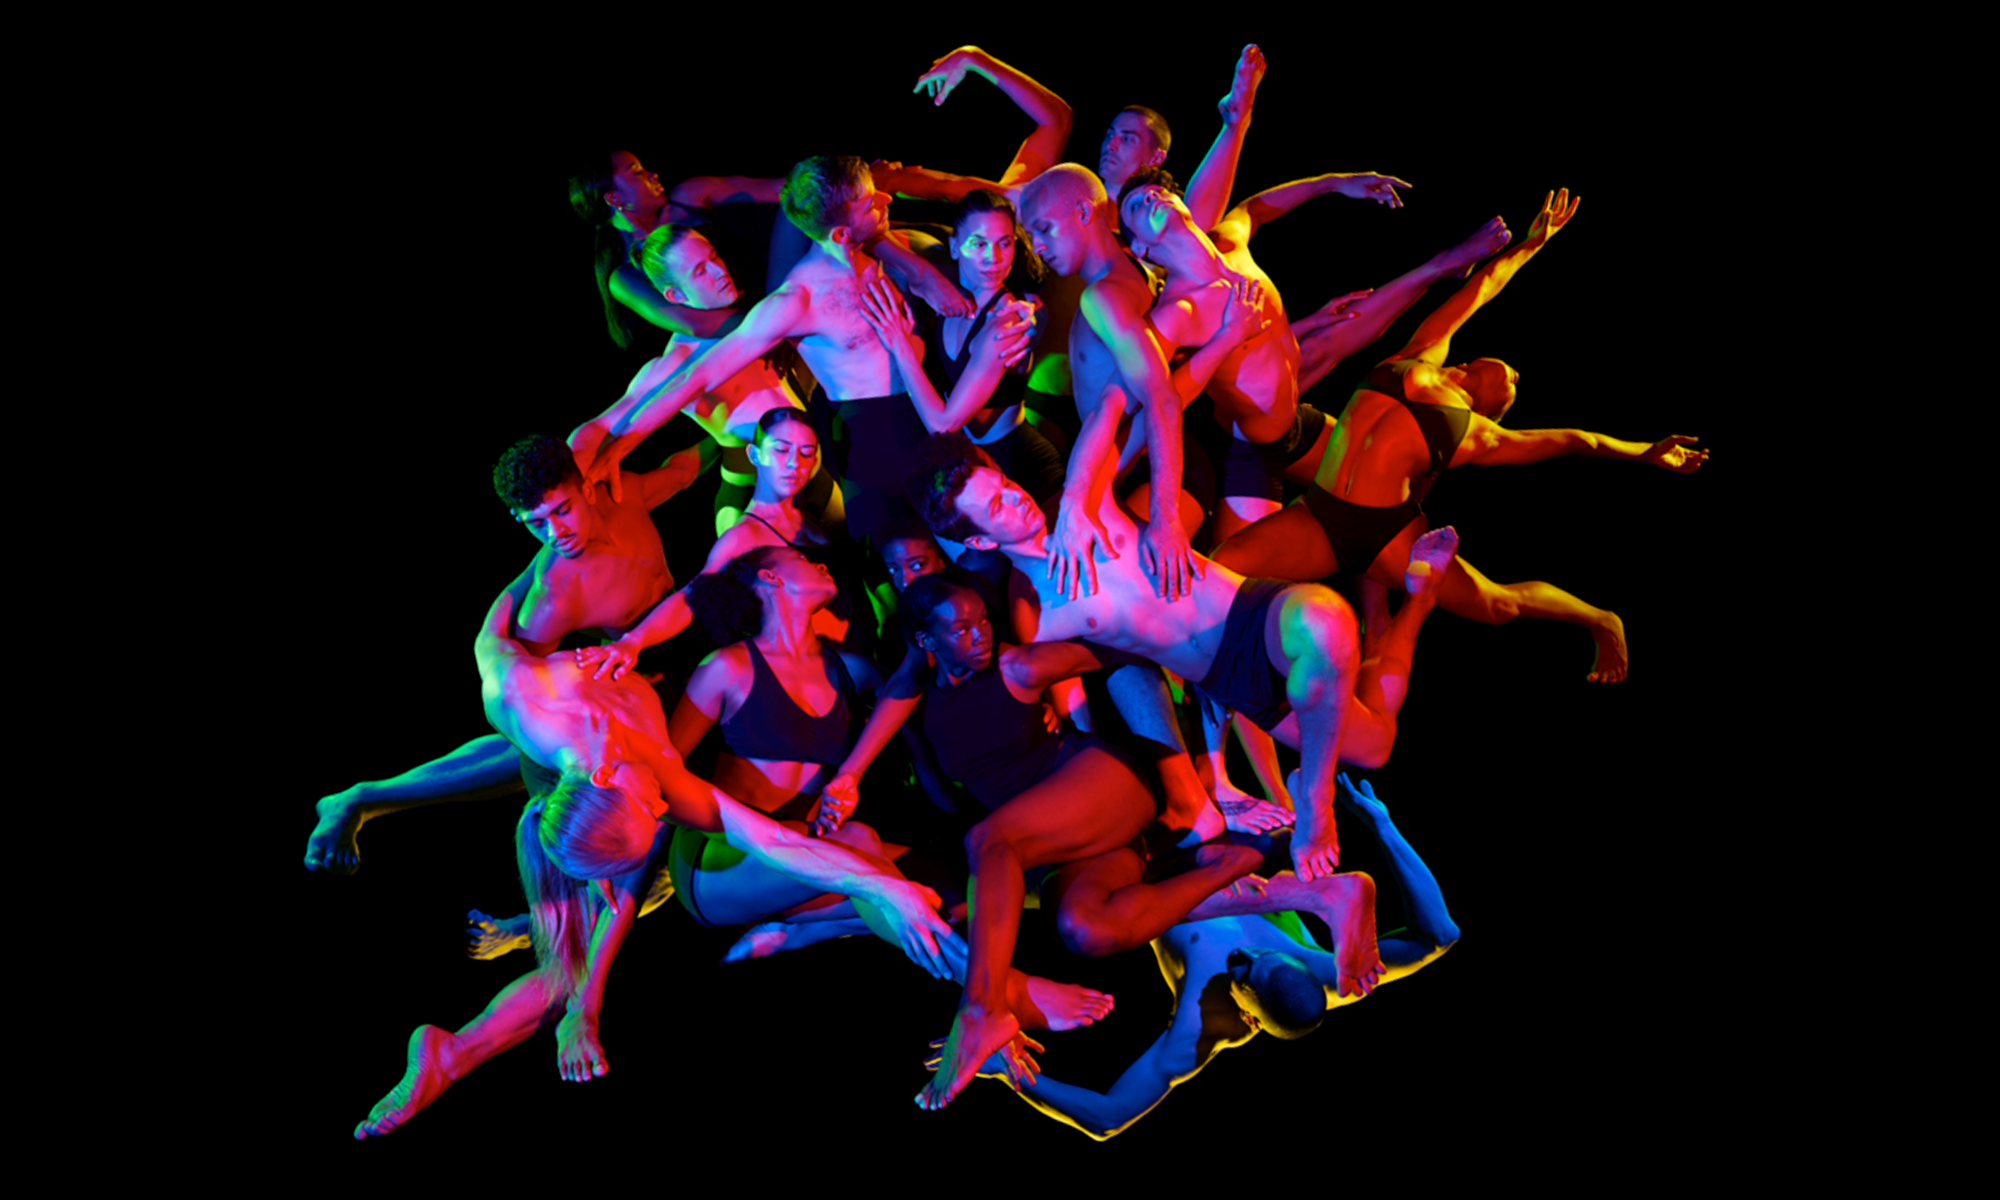 A group of dancers in colorful lighting.